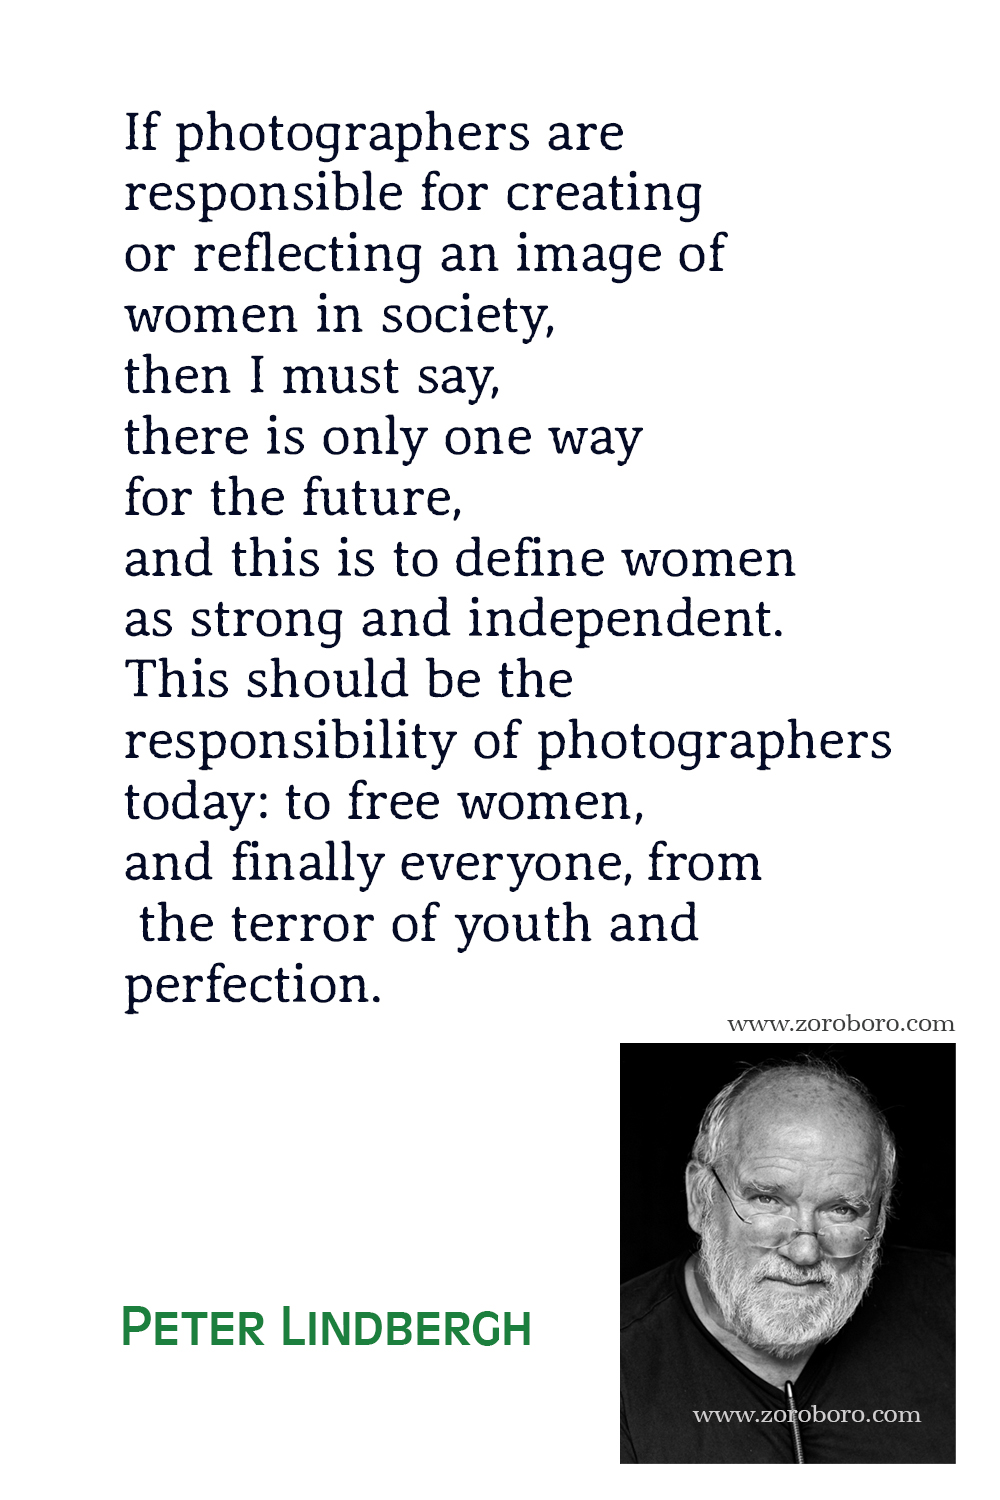 Peter Lindbergh Quotes, Peter Lindbergh Photography Quotes, Peter Lindbergh Women Quotes, Peter Lindbergh Photo Quotes